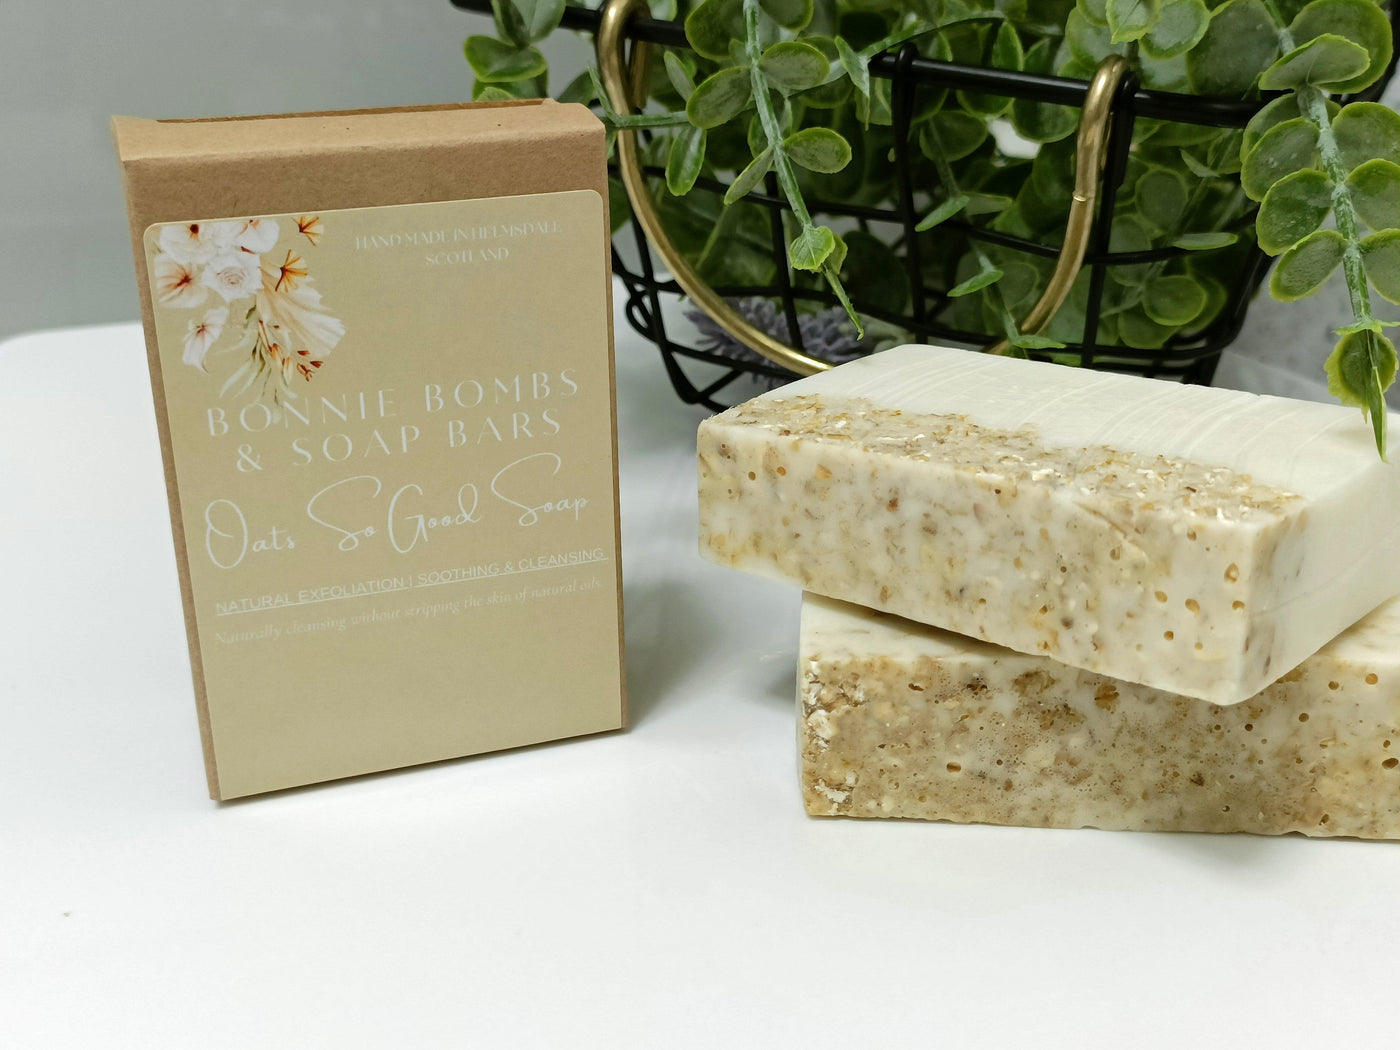 Hand made soaps, Oats